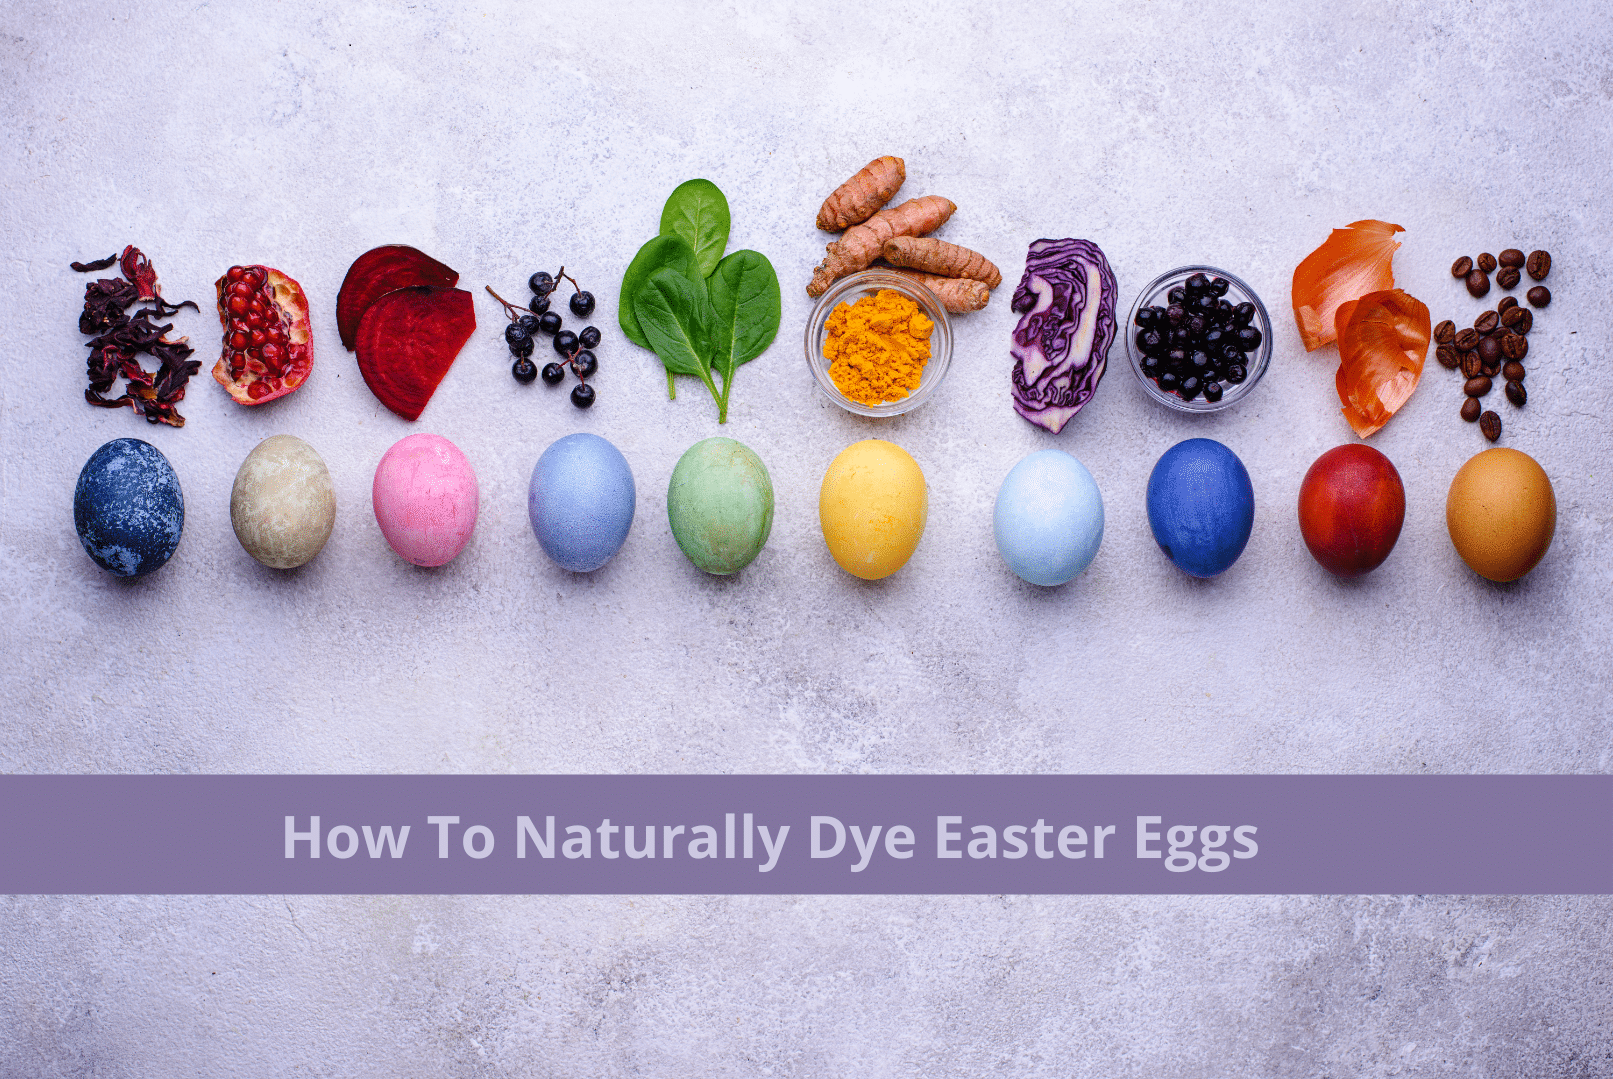 Dyeing Easter Eggs The Natural Way